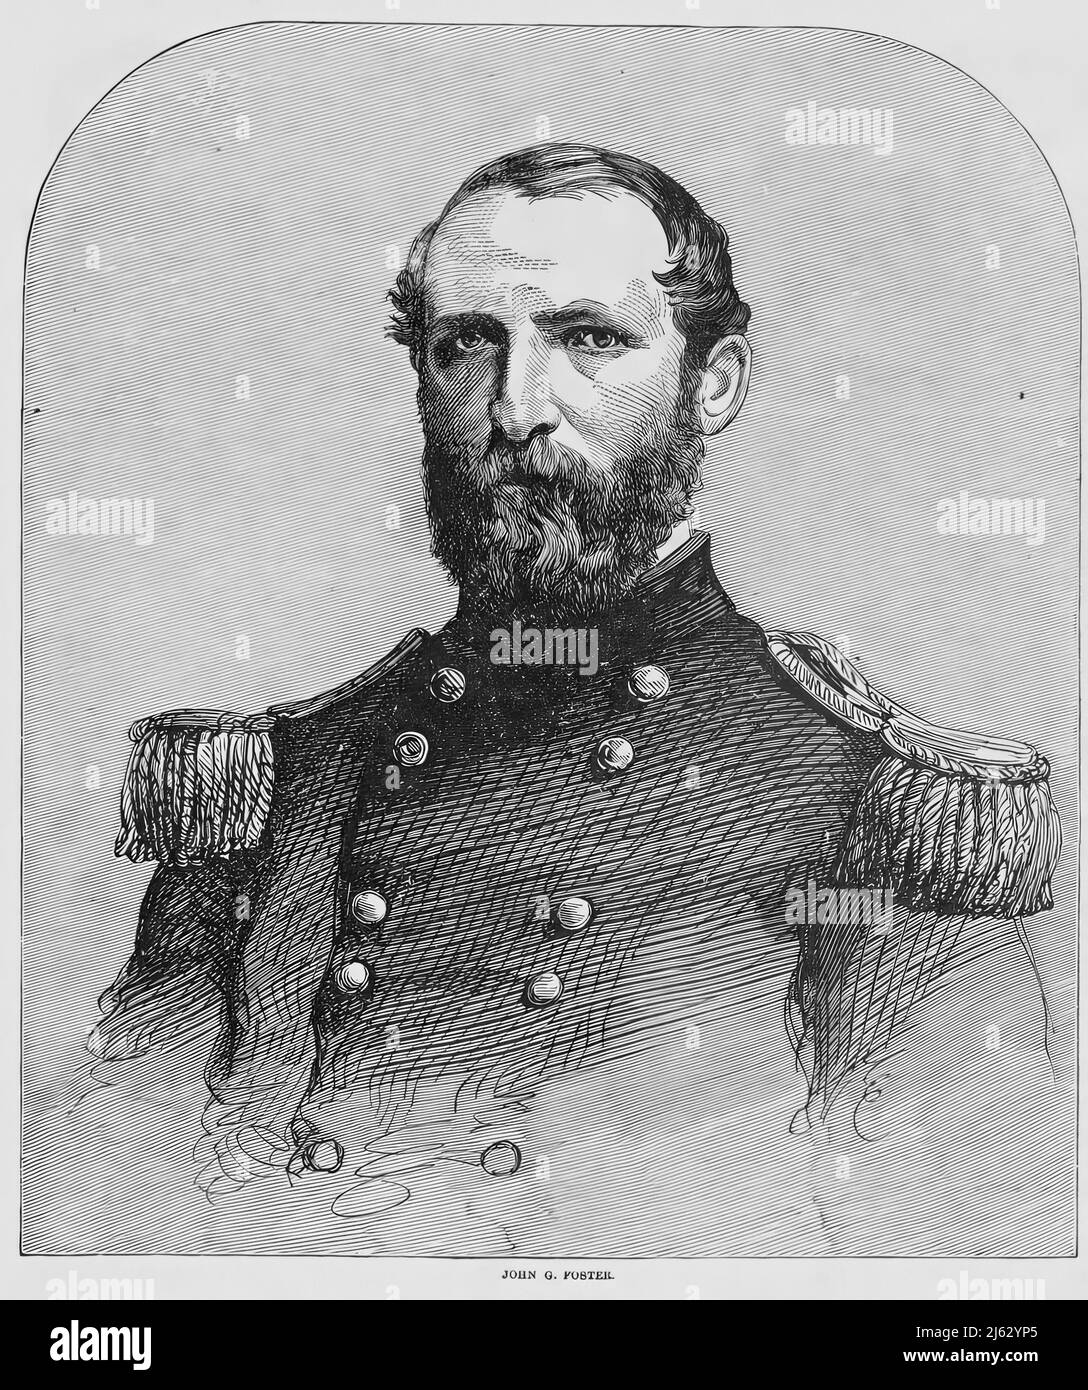 Portrait of John Gray Foster, Union Army General in the American Civil War. 19th century illustration Stock Photo